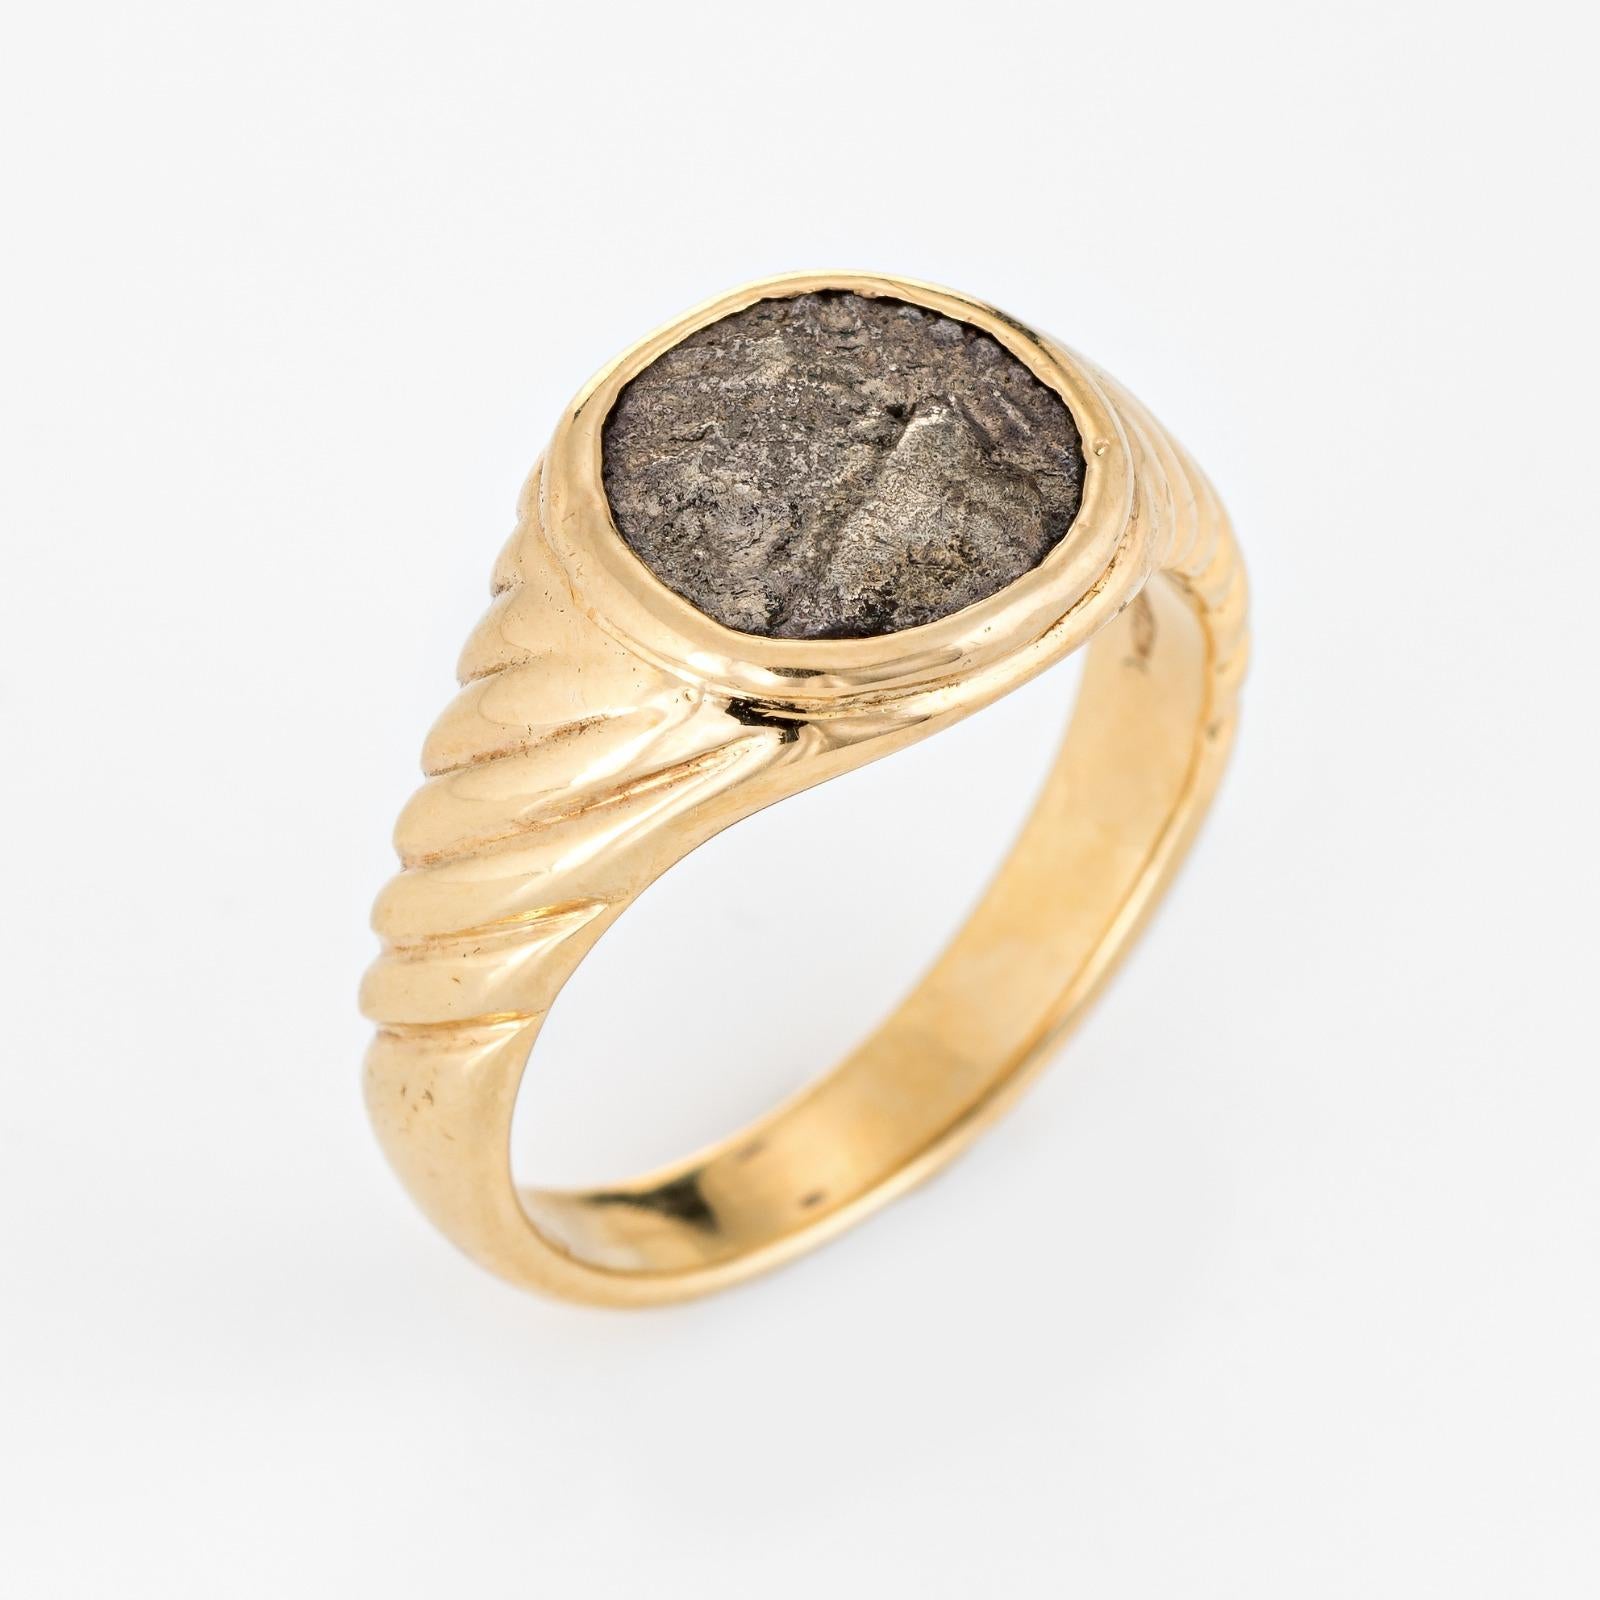 Stylish vintage Bulgari ancient coin ring crafted in 18 karat yellow gold (circa 1970s to 1980s).

The iconic coin ring was created by Bulgari back in the 1960s. The enduring 'Monete' design is very popular to this day with Bulgari recently